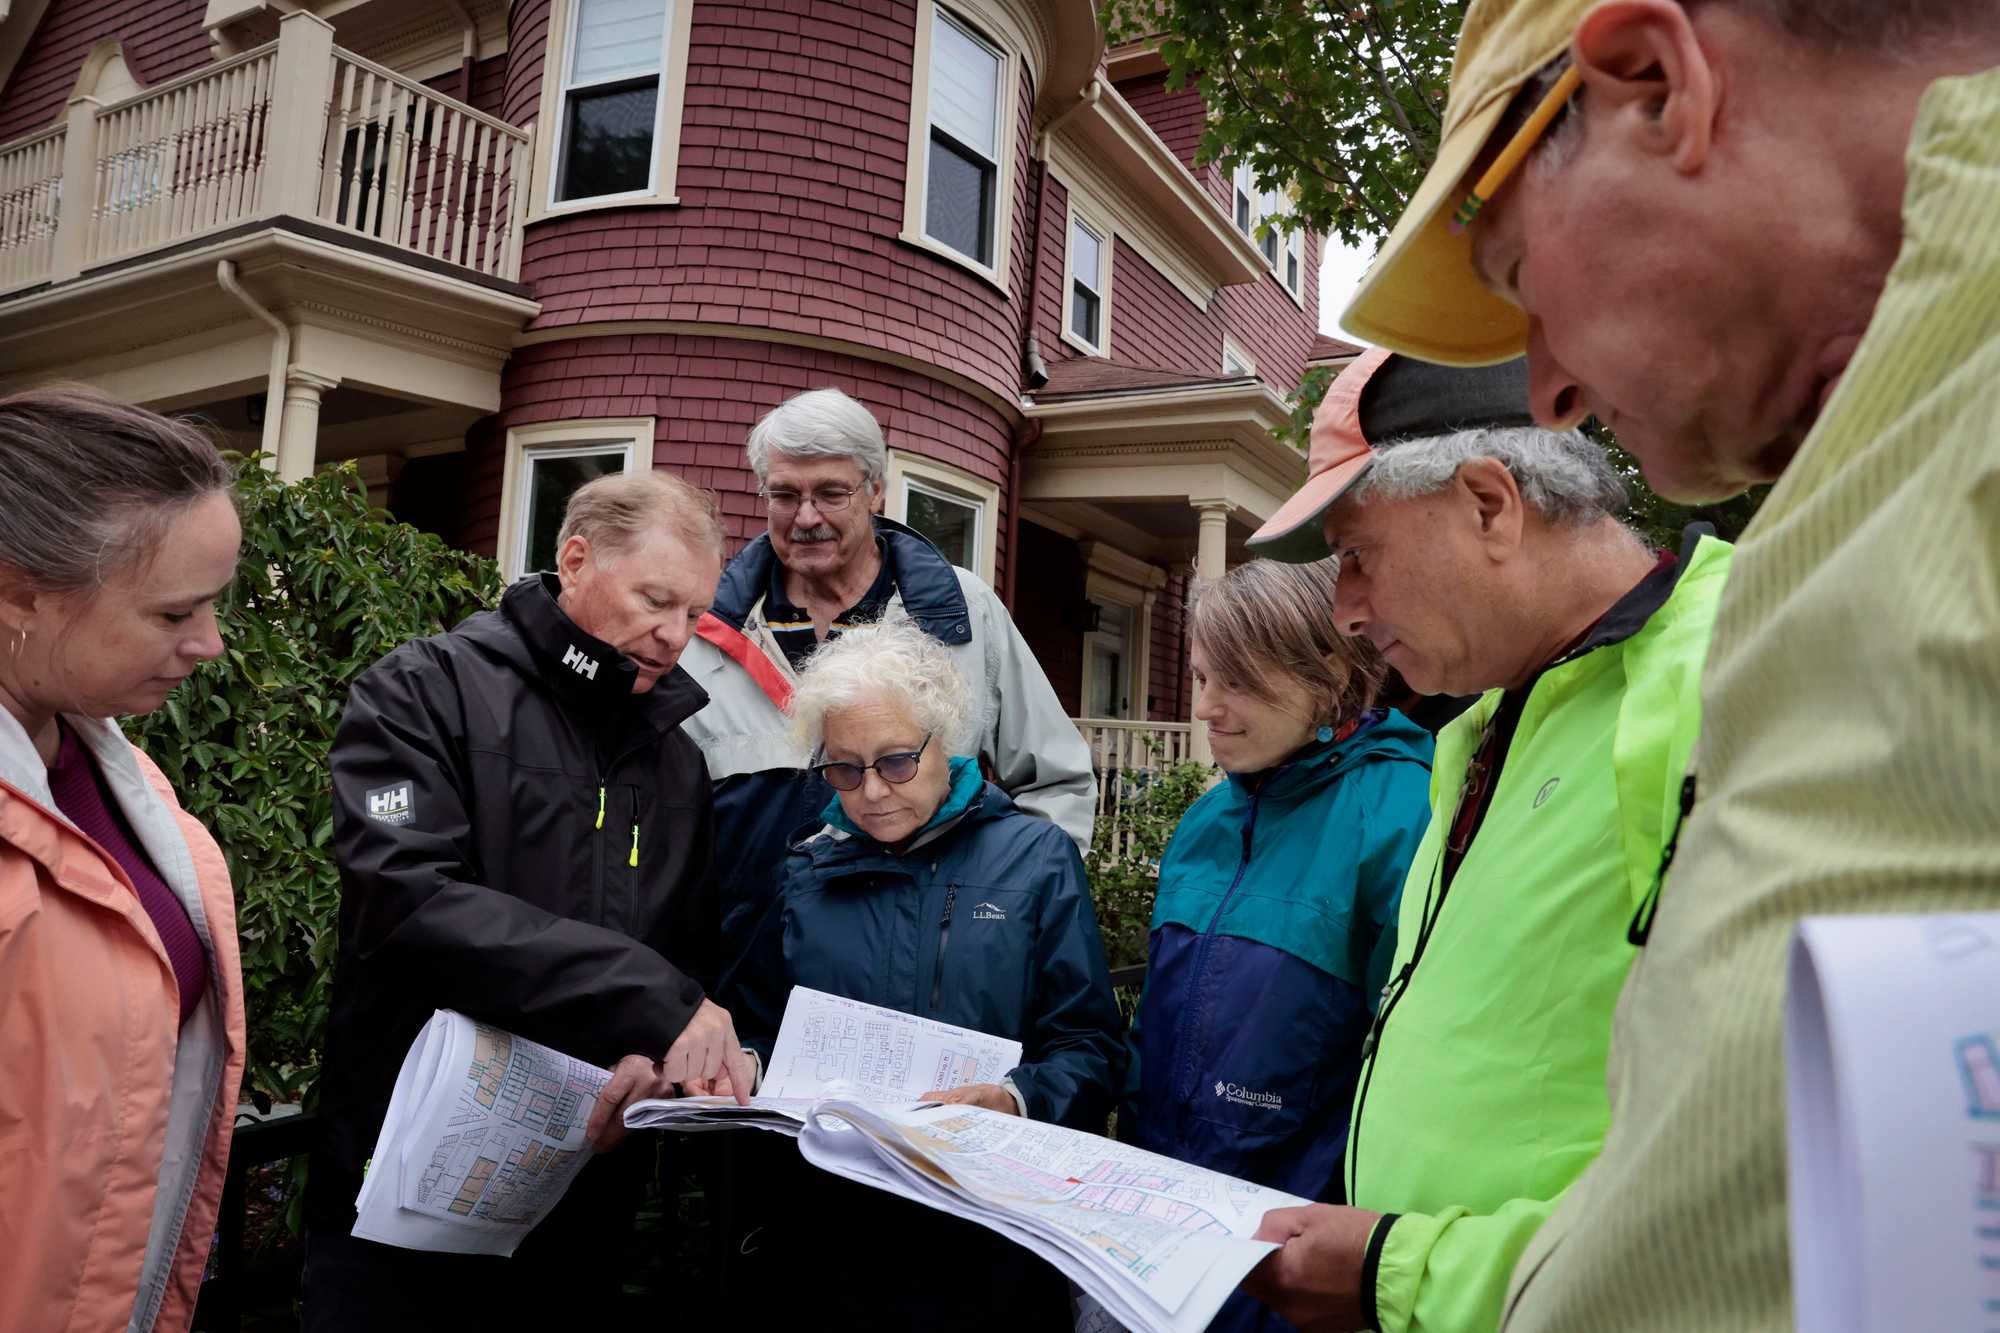 During a site walk of the town this summer, Brookline Planning Director Kara Brewton (left) talked with members of a committee considering zoning changes. Studying the zoning map were Ken Lewis, committee chairman Richard Benka, Linda Olson Pehlke, Katha Seidman, Neil Wishinsky, and David Pollak.
